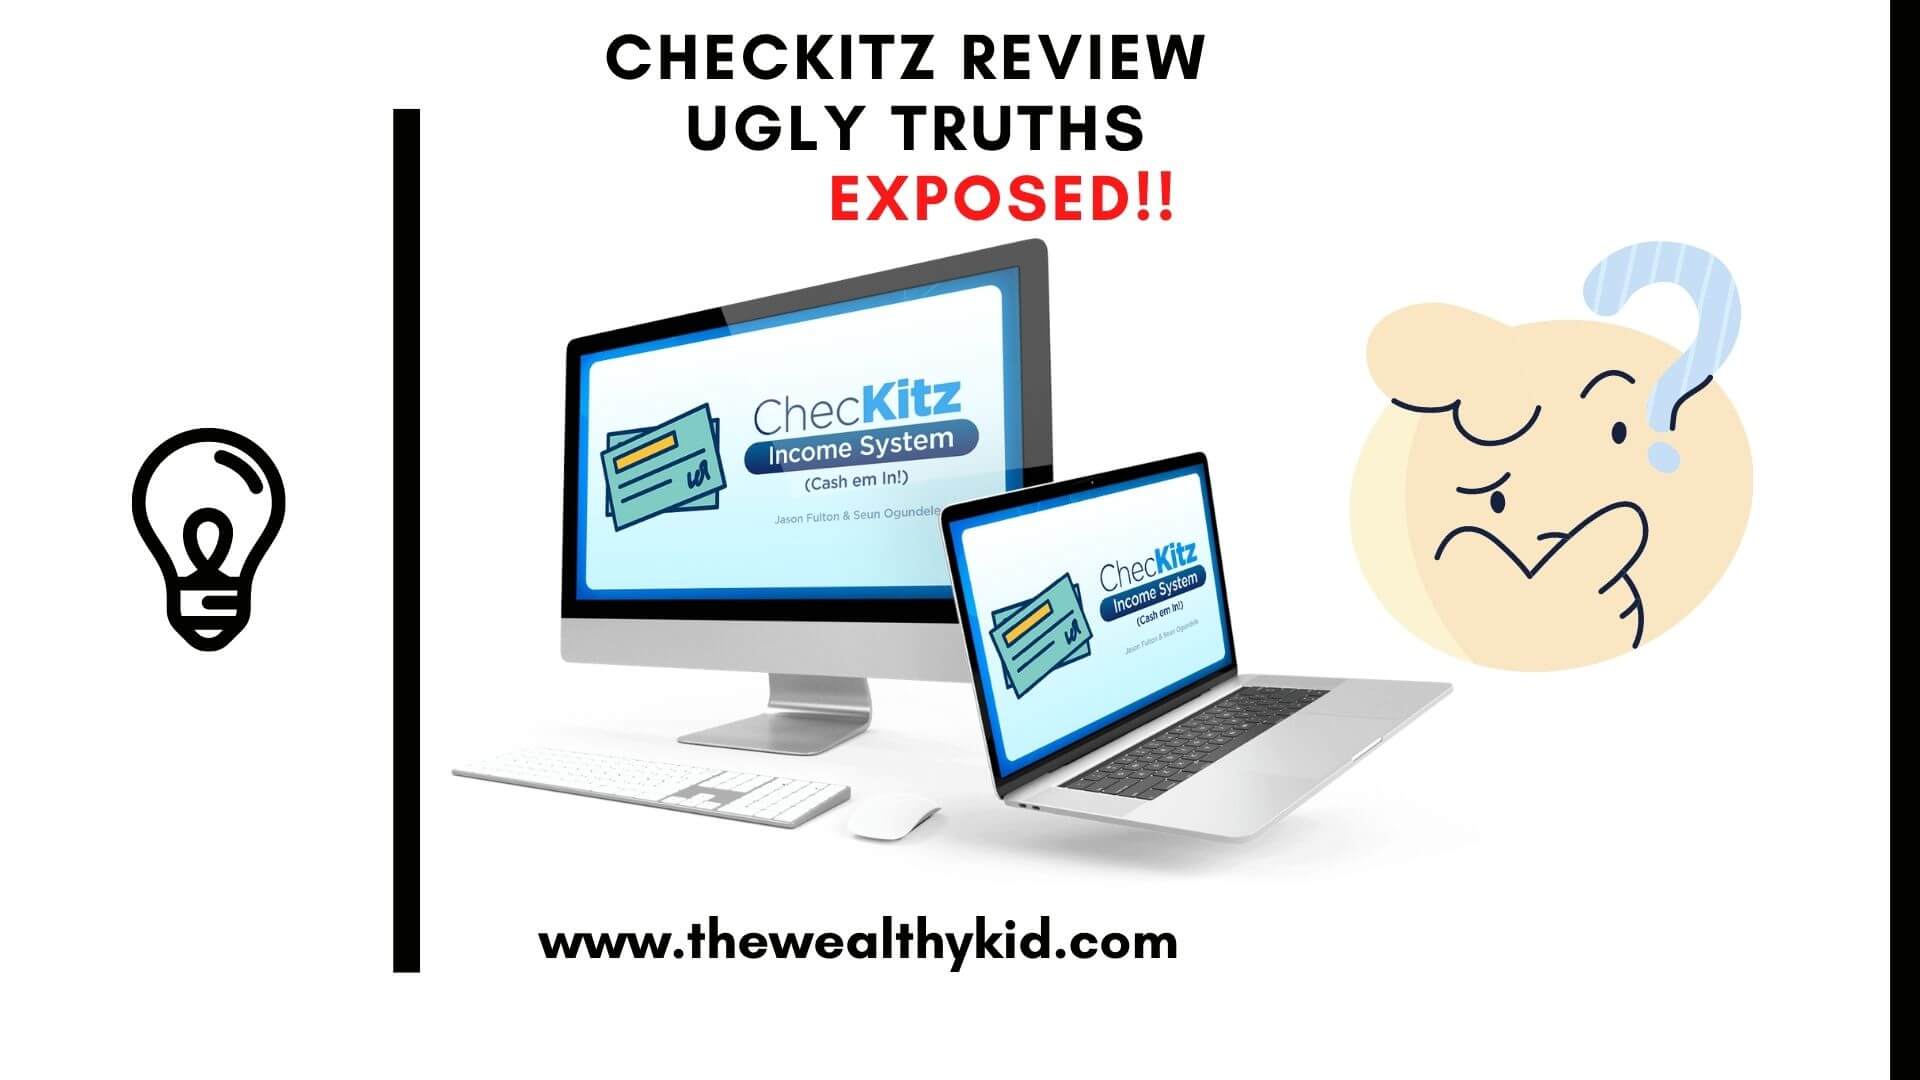 Checkitz Review – Ugly Truths Exposed!